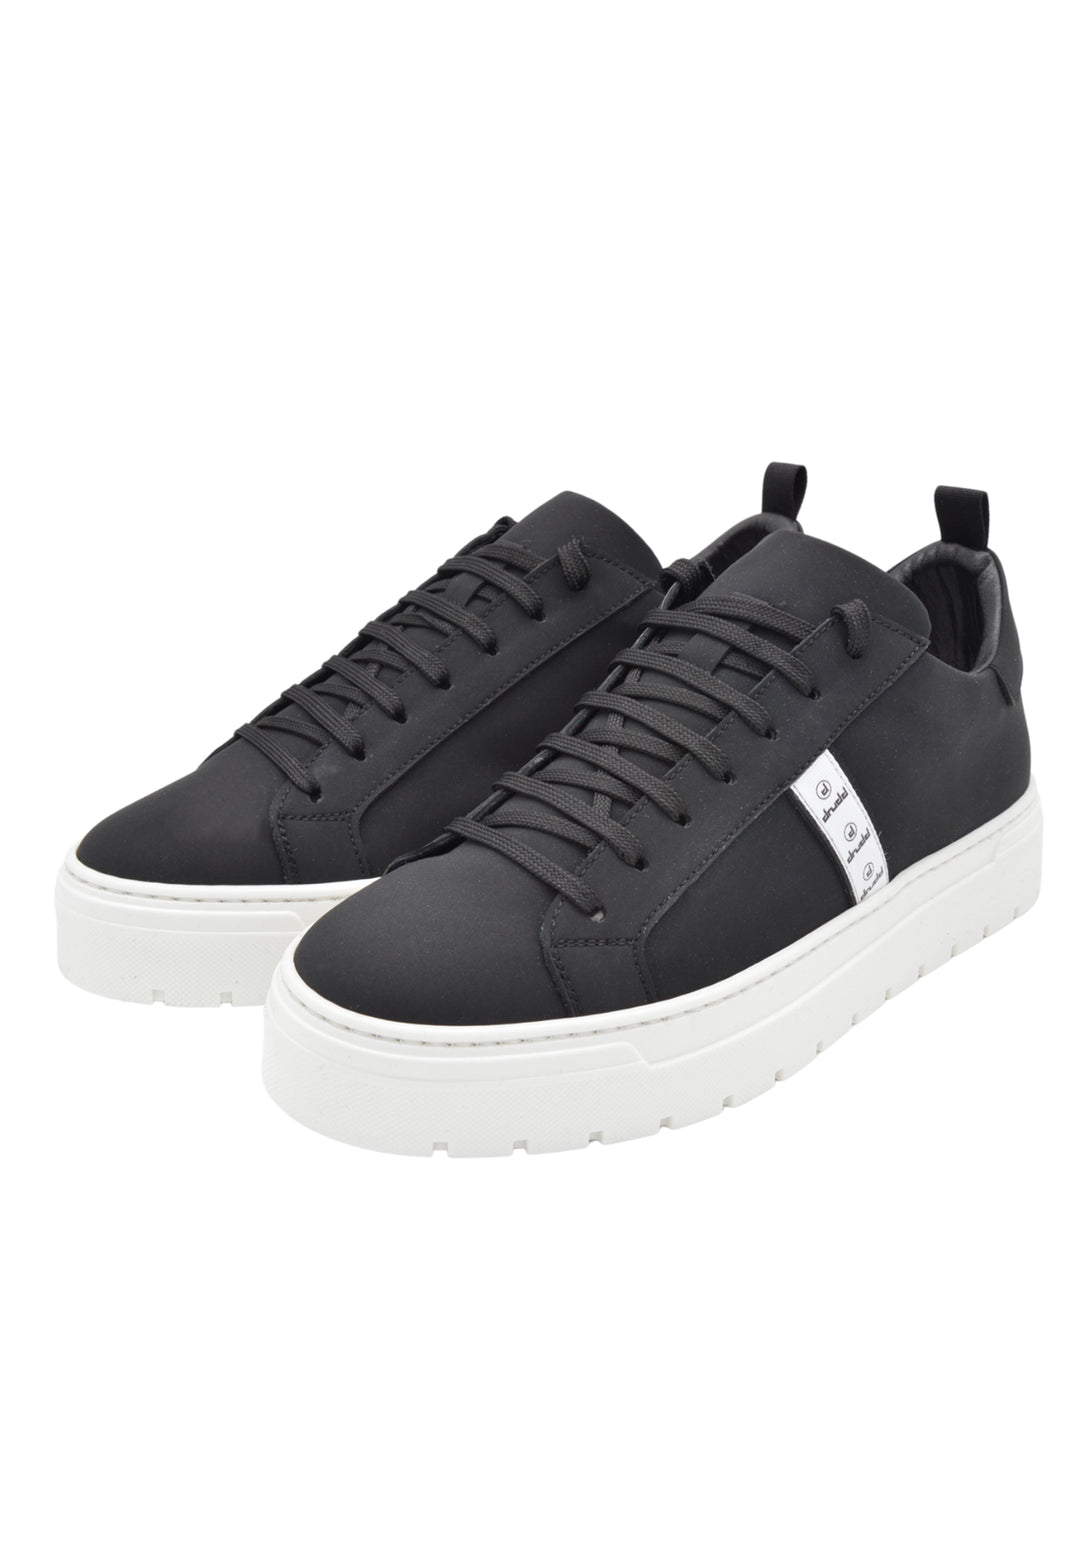 Sneakers Pelle Riciclata Nera - DR8